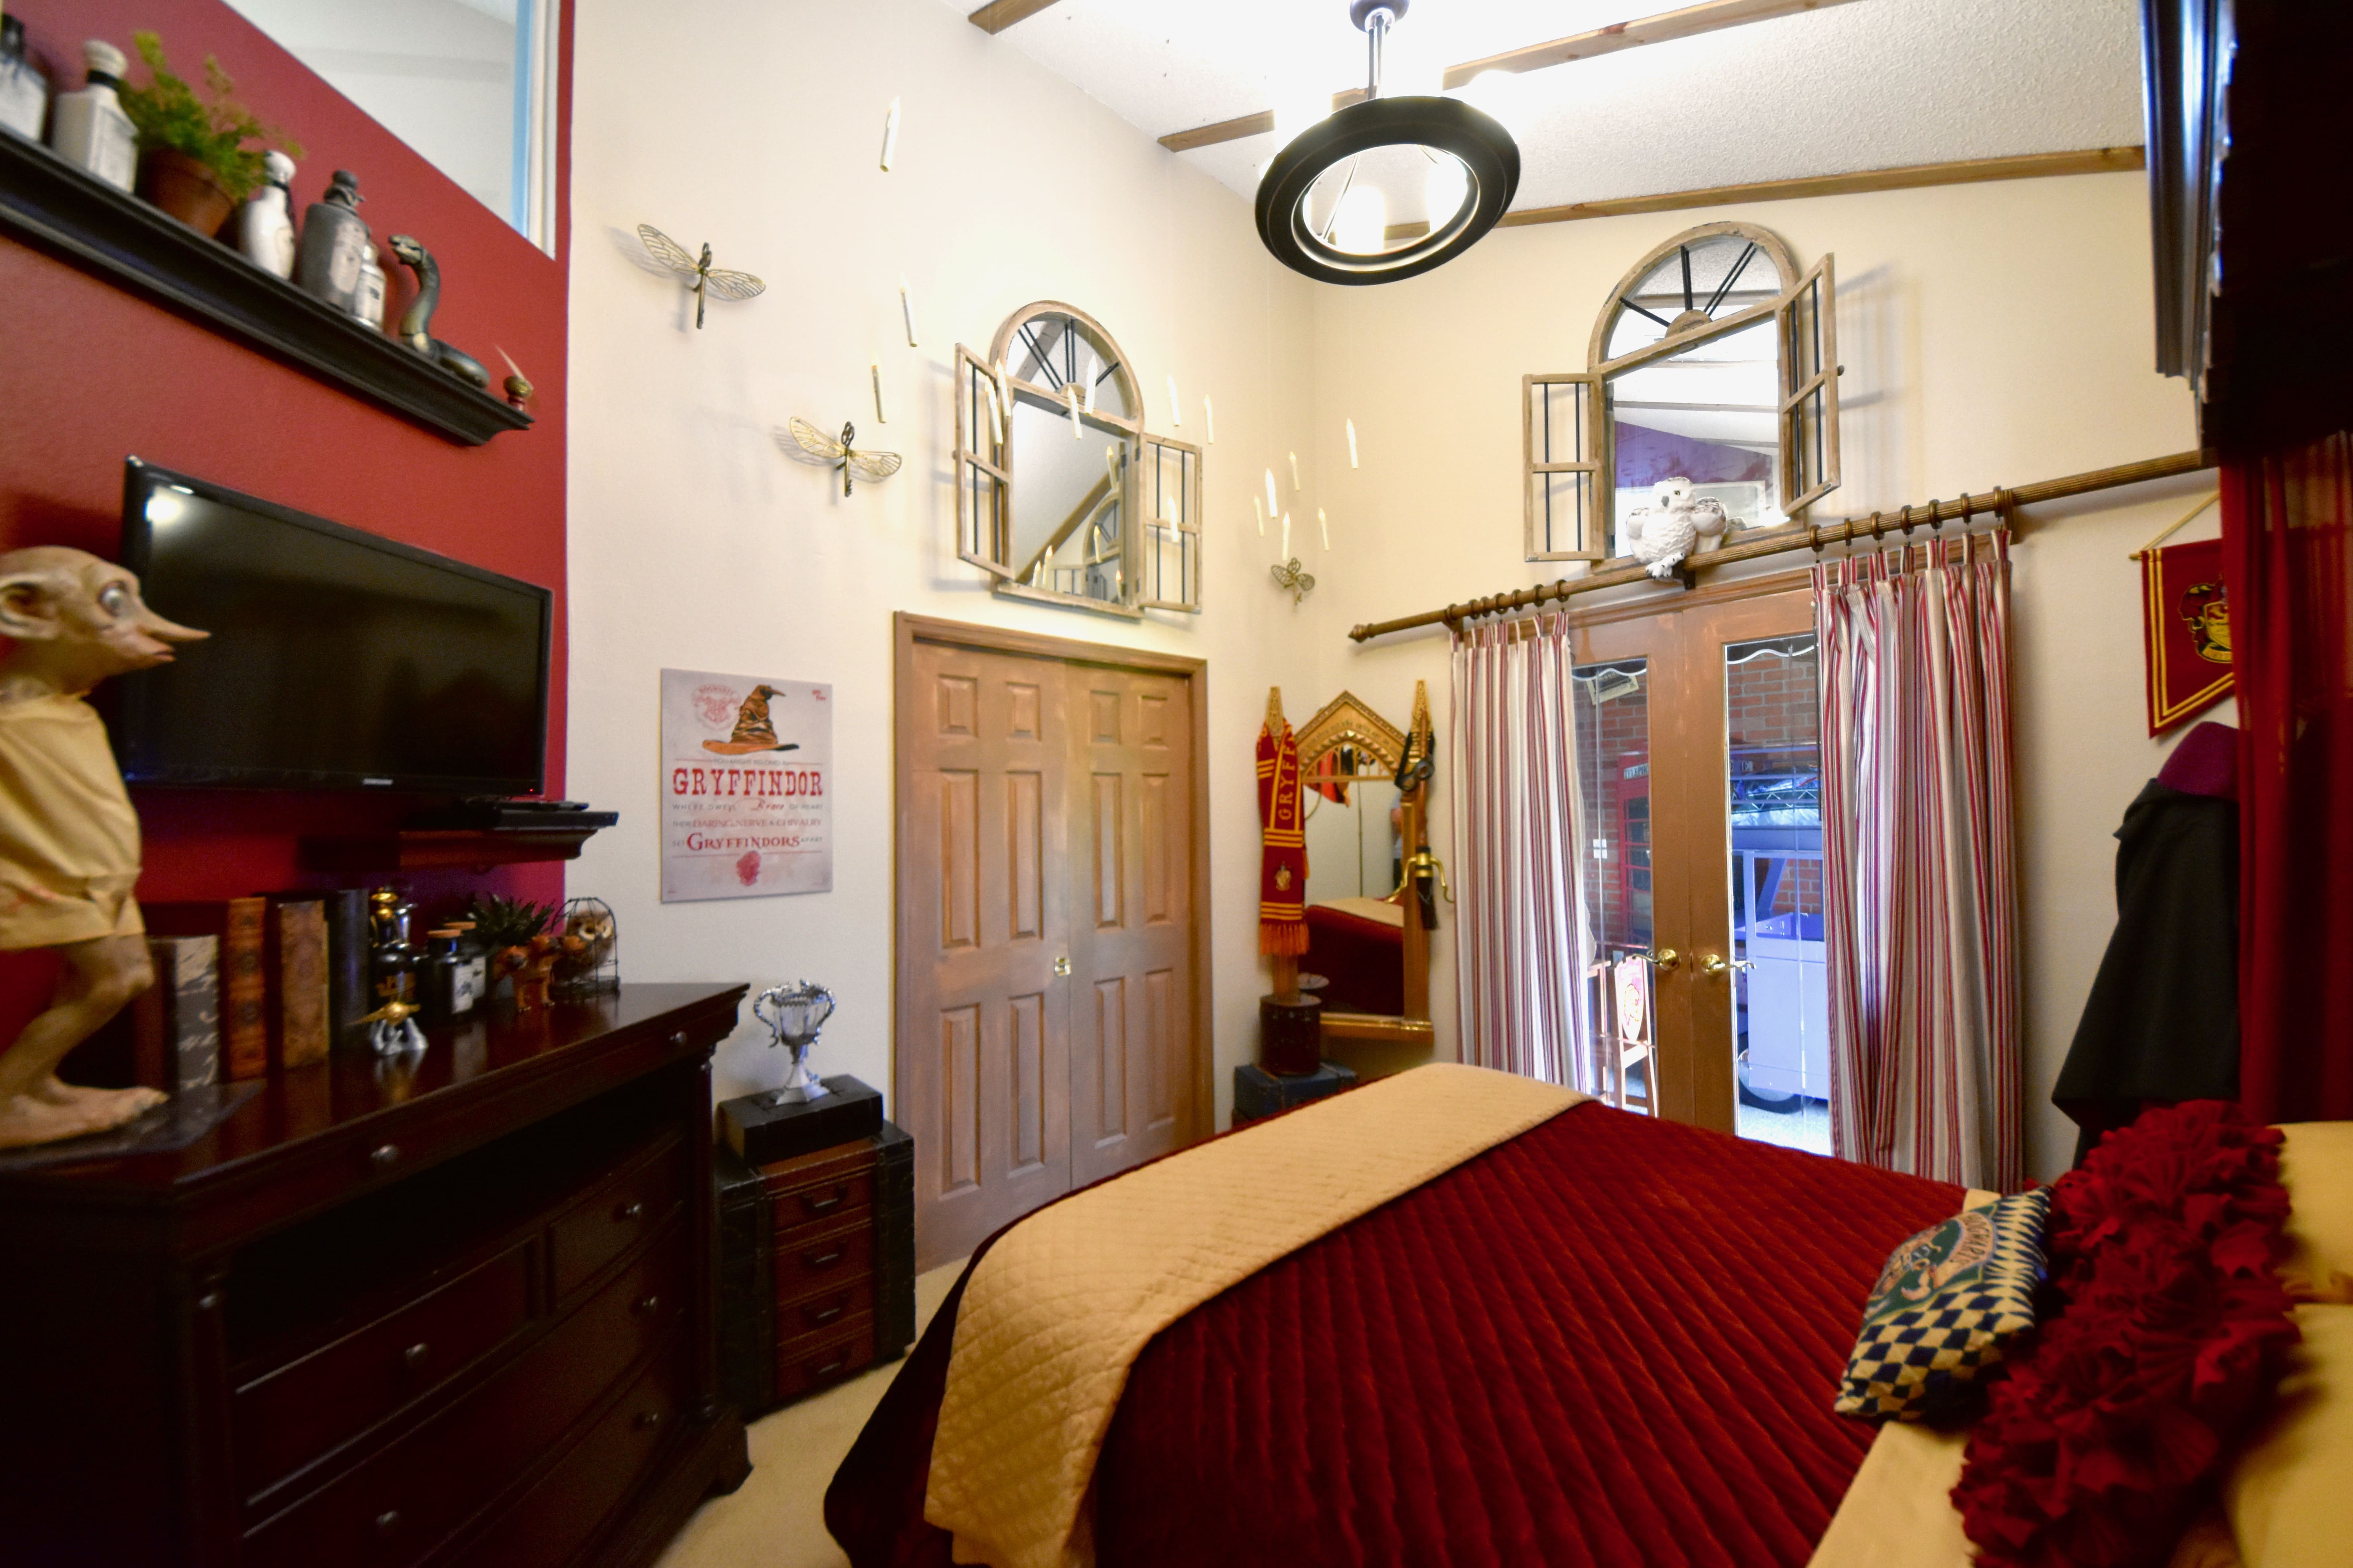 With a luxurious queen bed, streaming TV, and floating candles, this room suits Muggles of all ages!